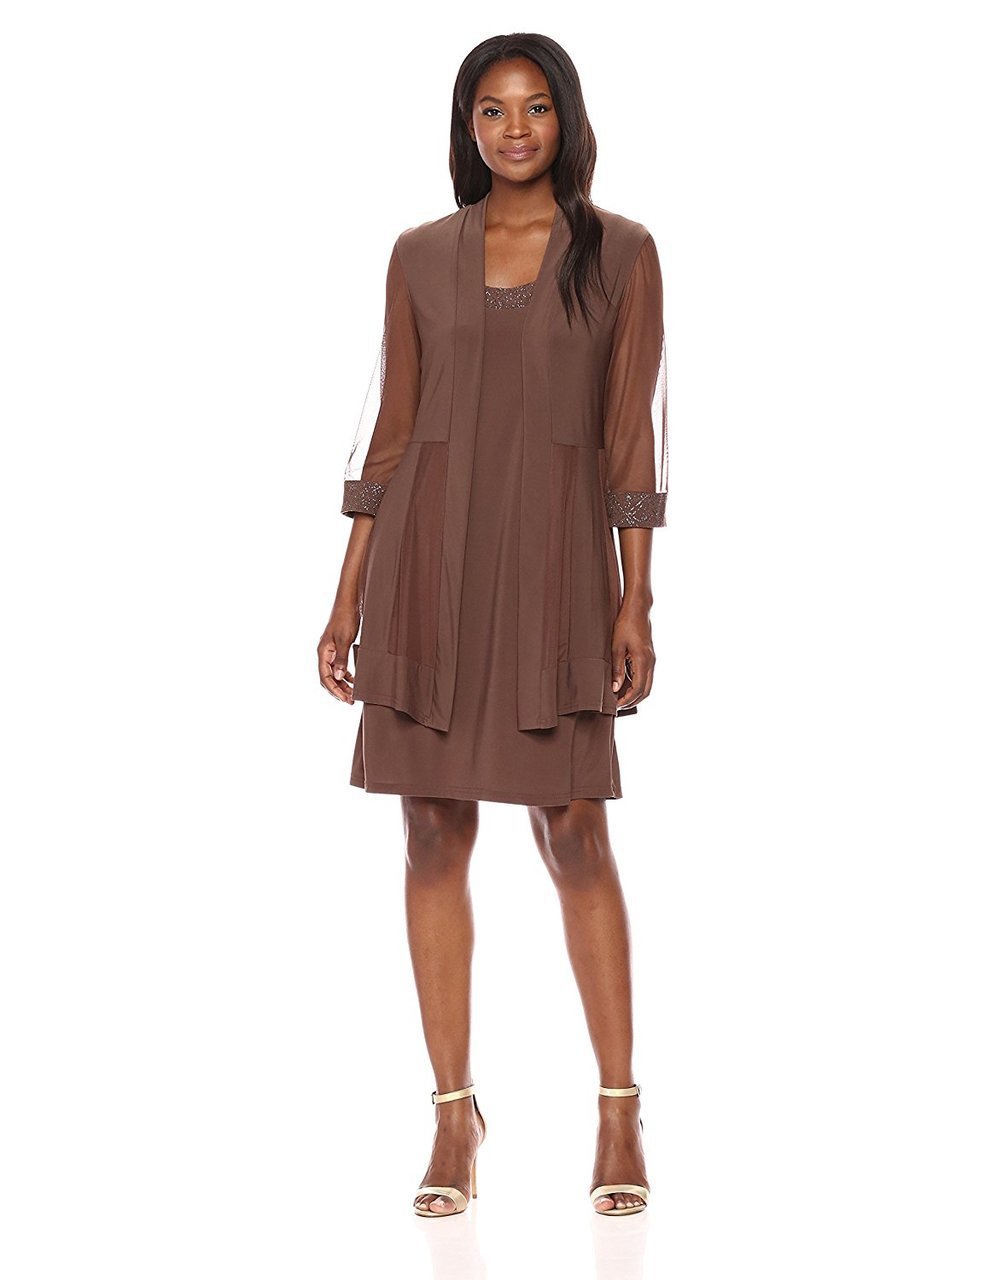 R&M Richards - 8271 Sleeveless Cocktail Dress with Jacket in Brown